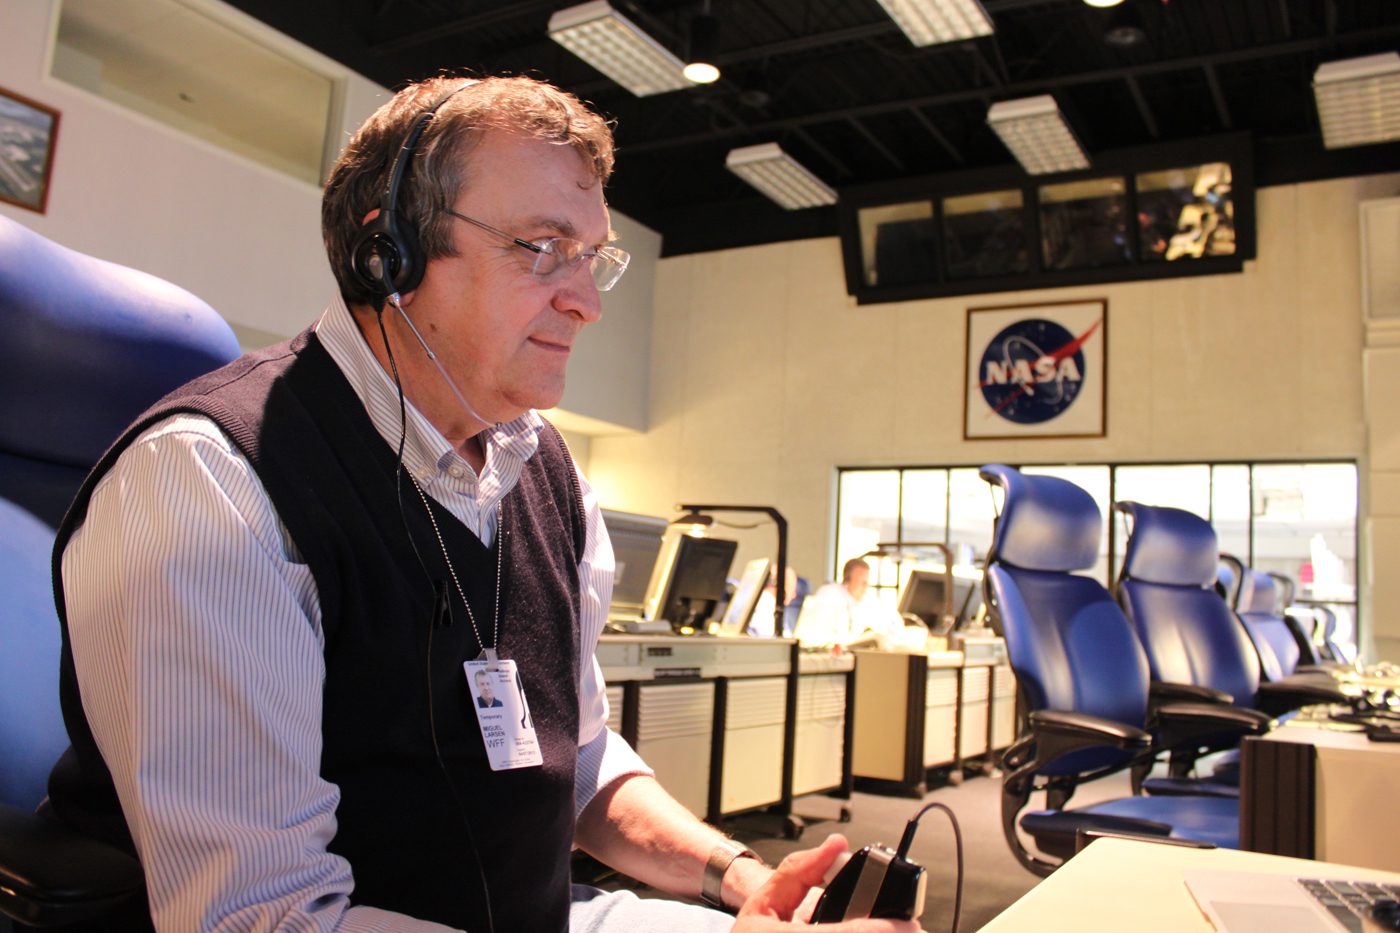 Man sits in NASA control center working on computer.